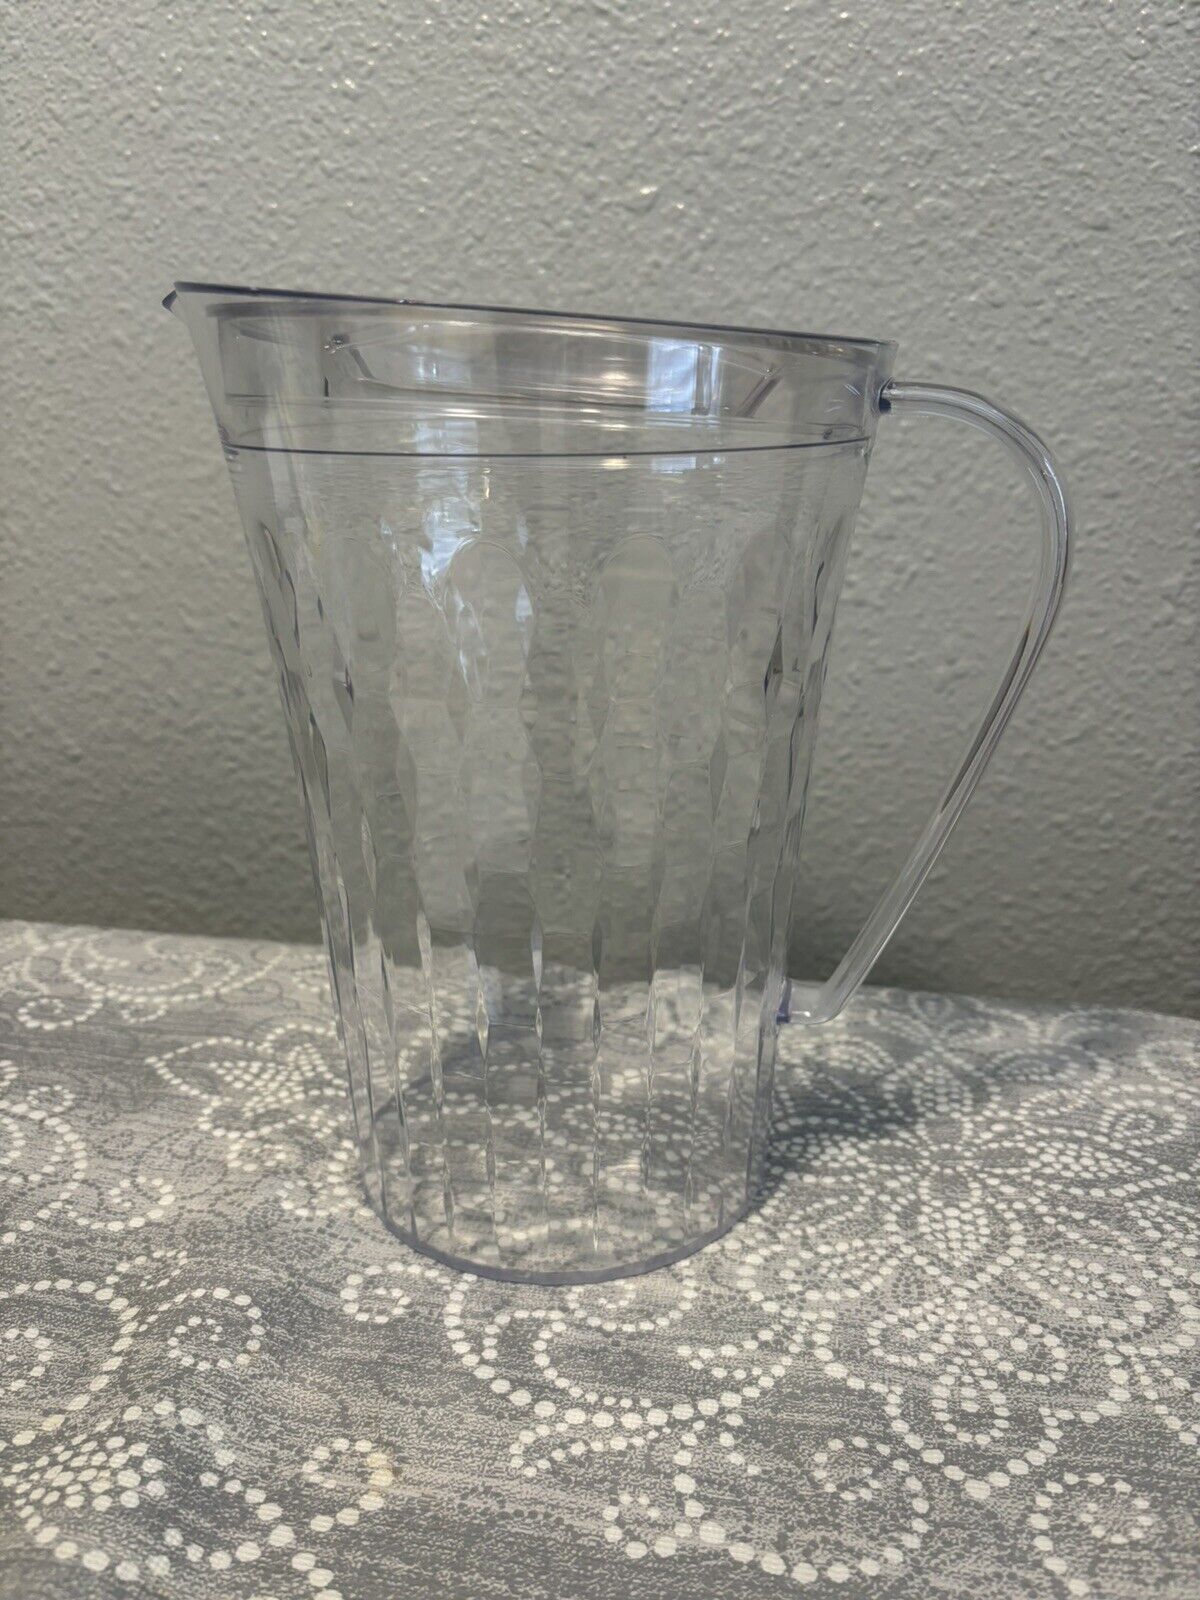 BRAND NEW Tupperware Ice Prism 2-Qt./2 L Pitcher Crystal Clear